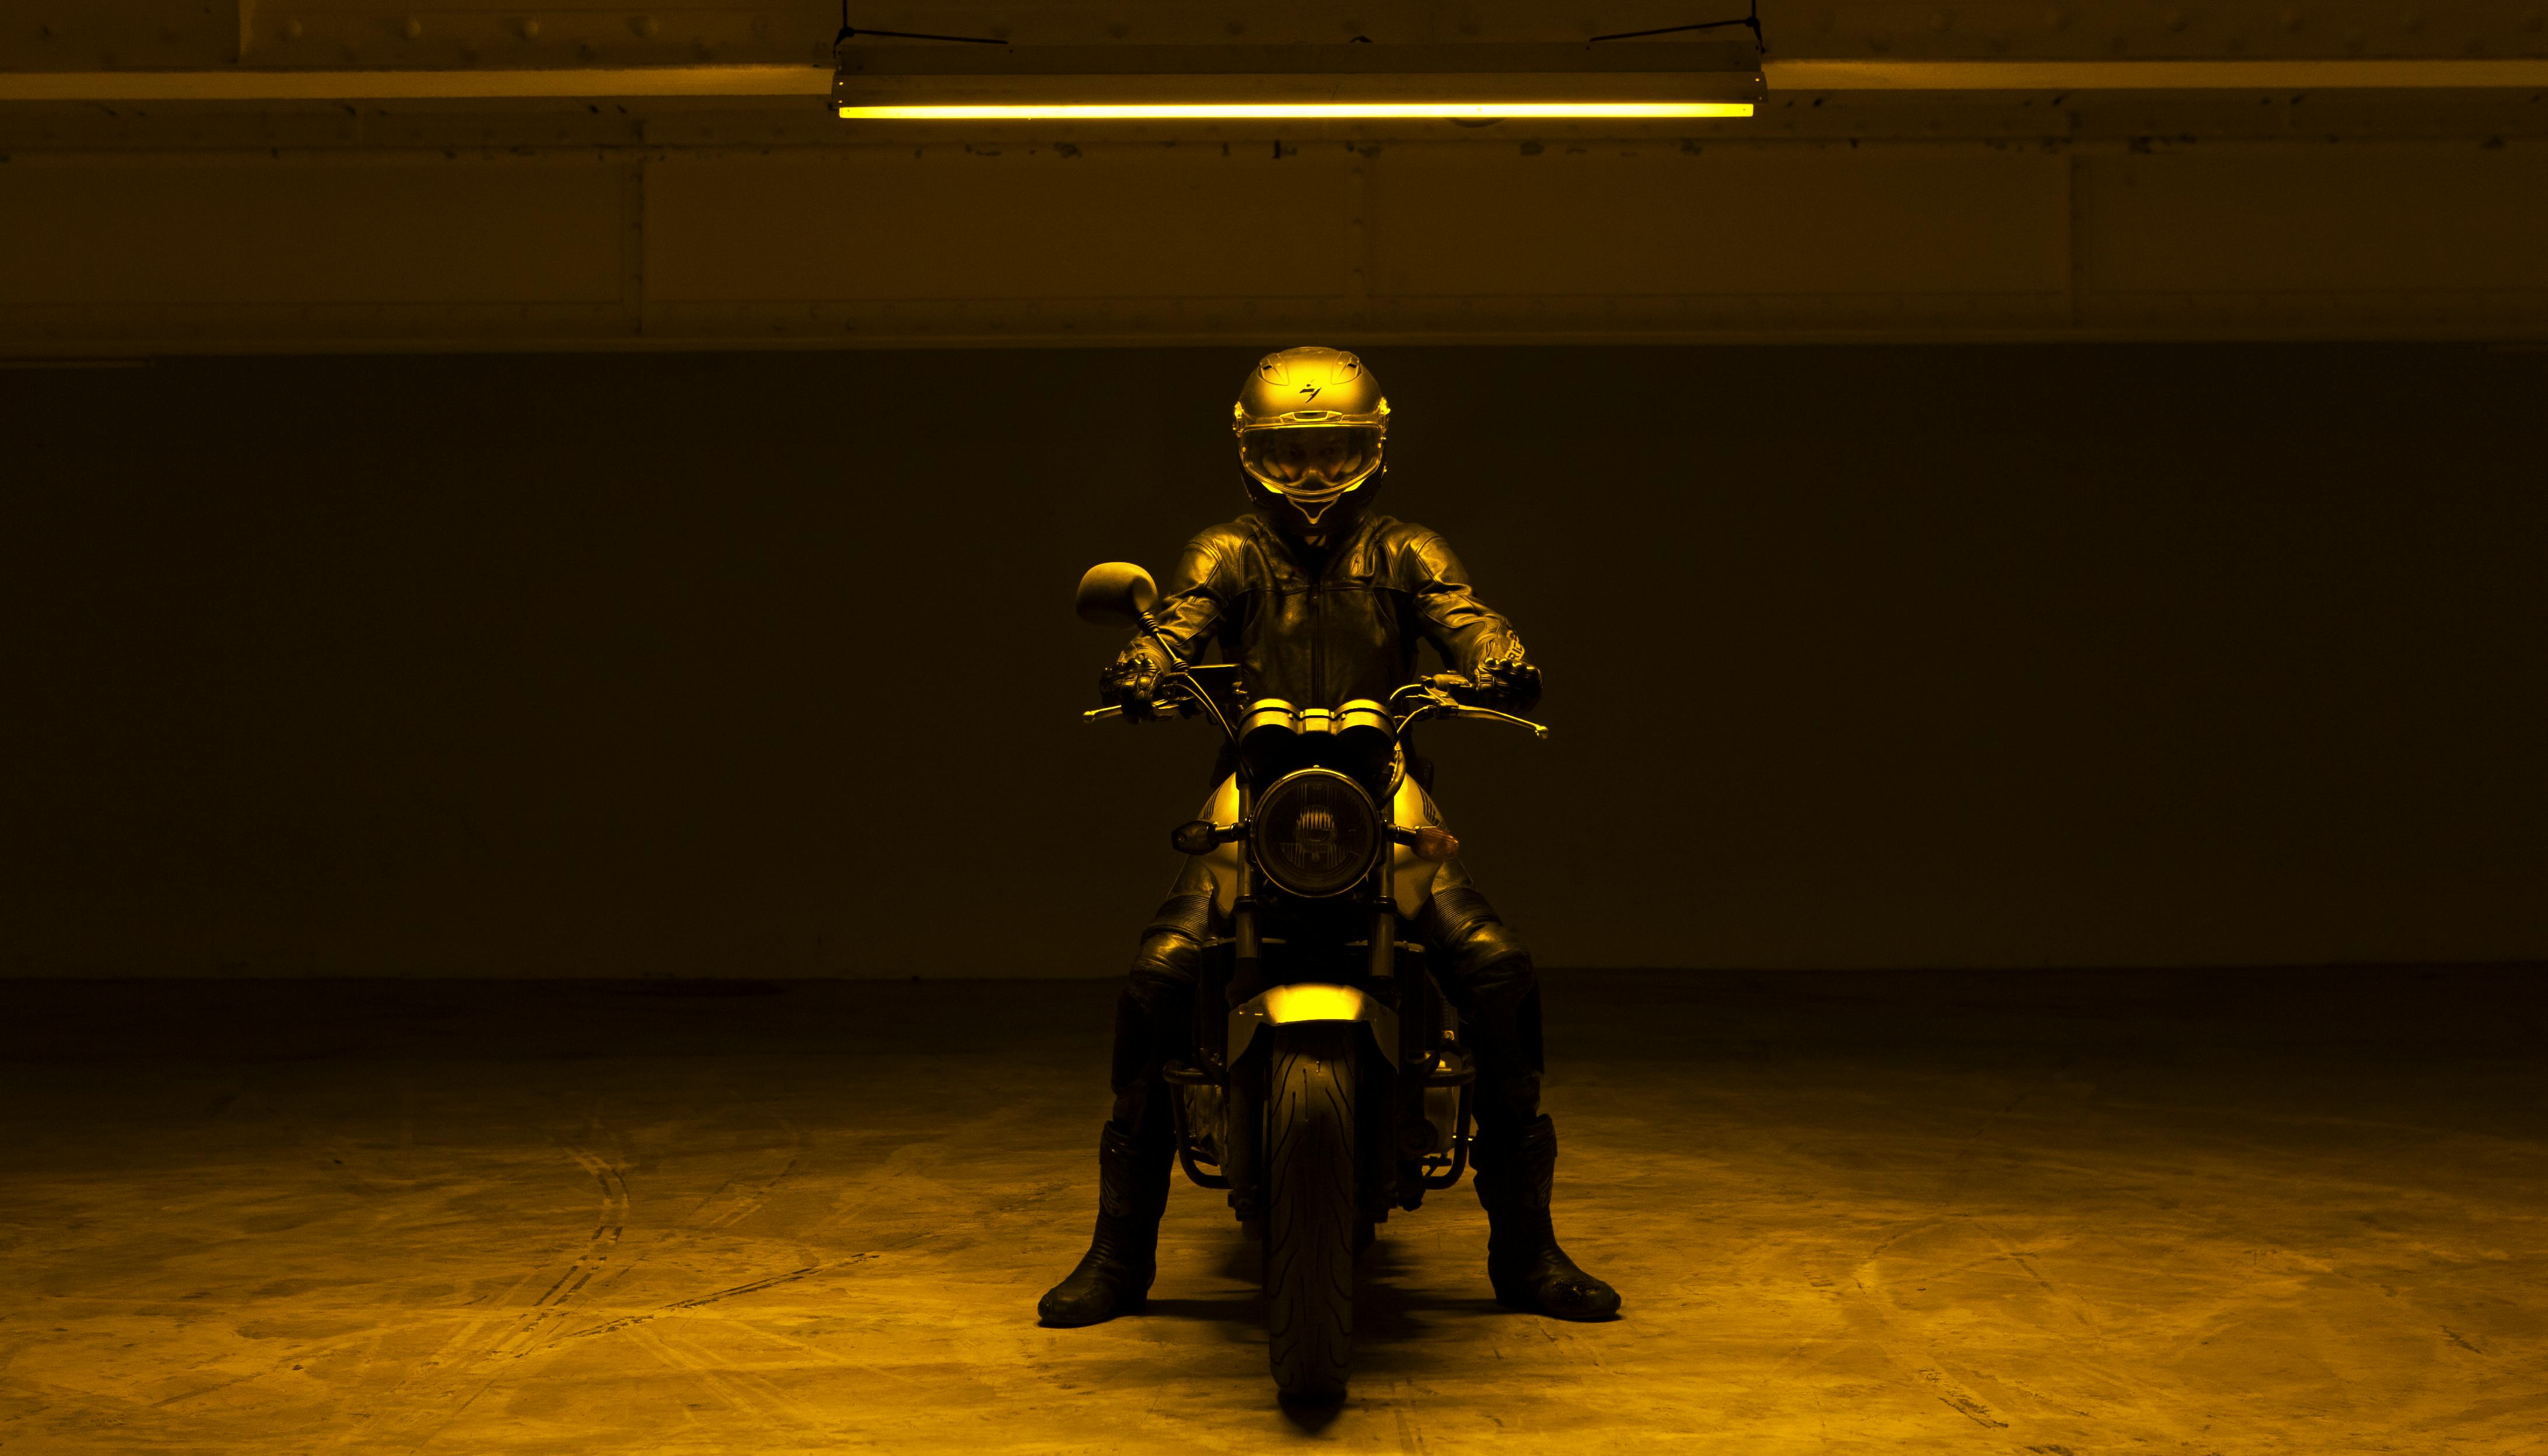 A motorcyclist wearing a full-face helmet is dressed in black on a motorbike in the middle of a garage